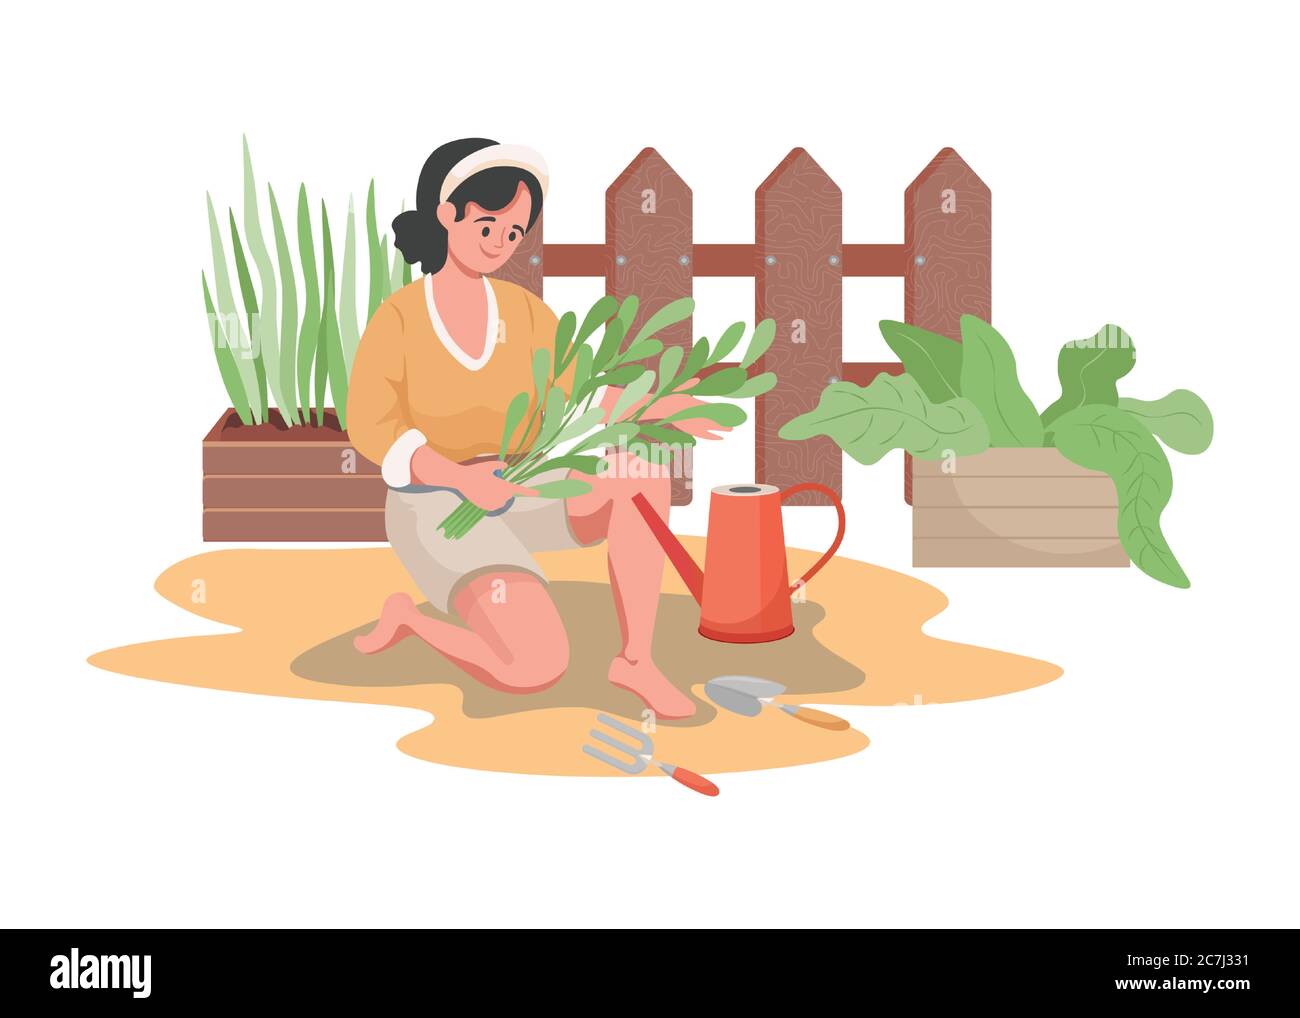 Happy smiling woman planting and watering garden flowers or vegetables vector flat illustration. Summertime gardening, agriculture gardener hobby, relaxing weekend in nature concept. Stock Vector